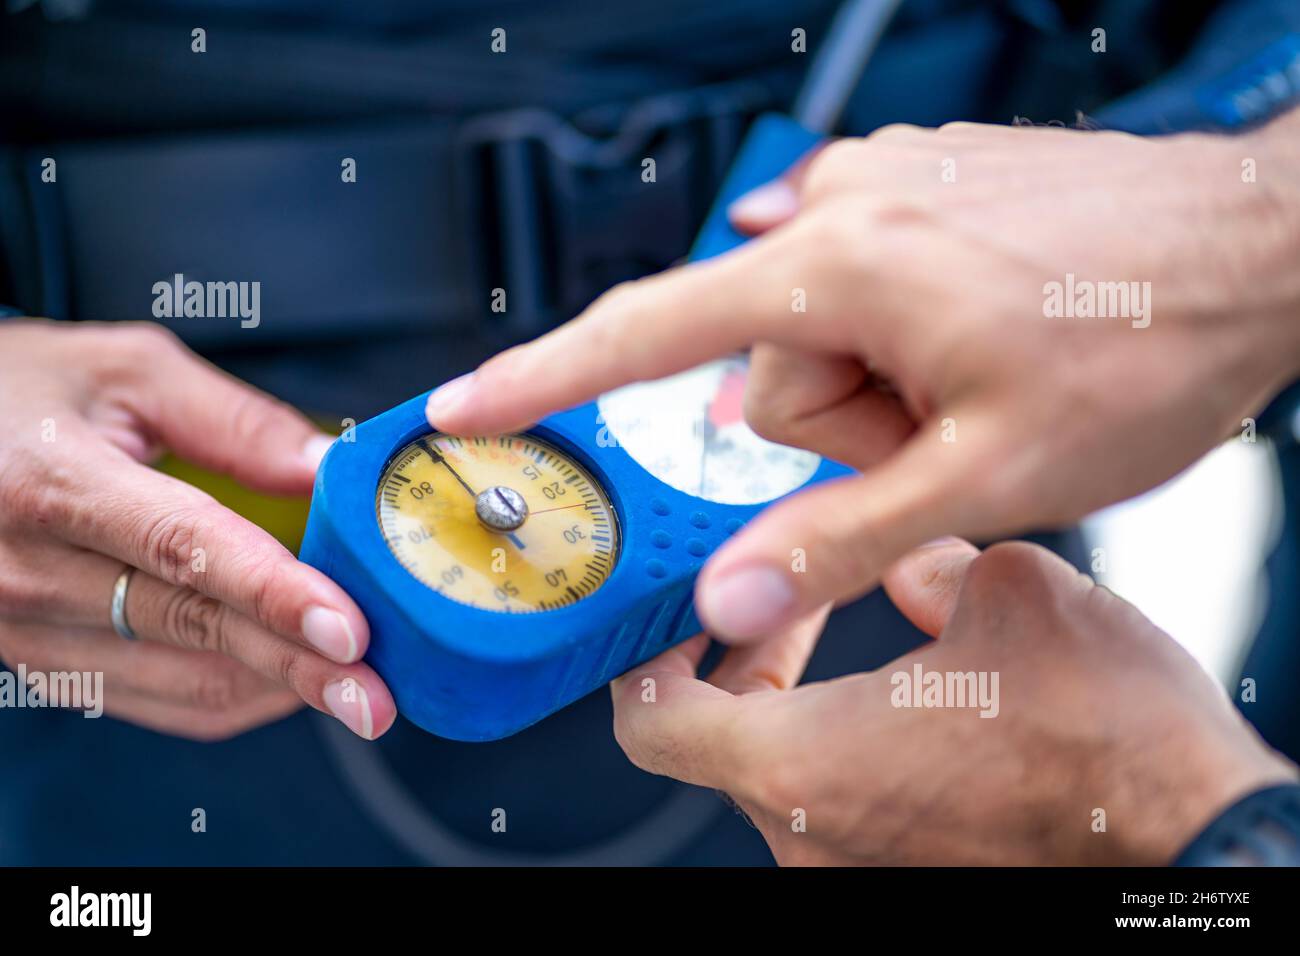 Man explaining that pressure gauge shows how much air is in the tank during scuba diving, Spain Stock Photo